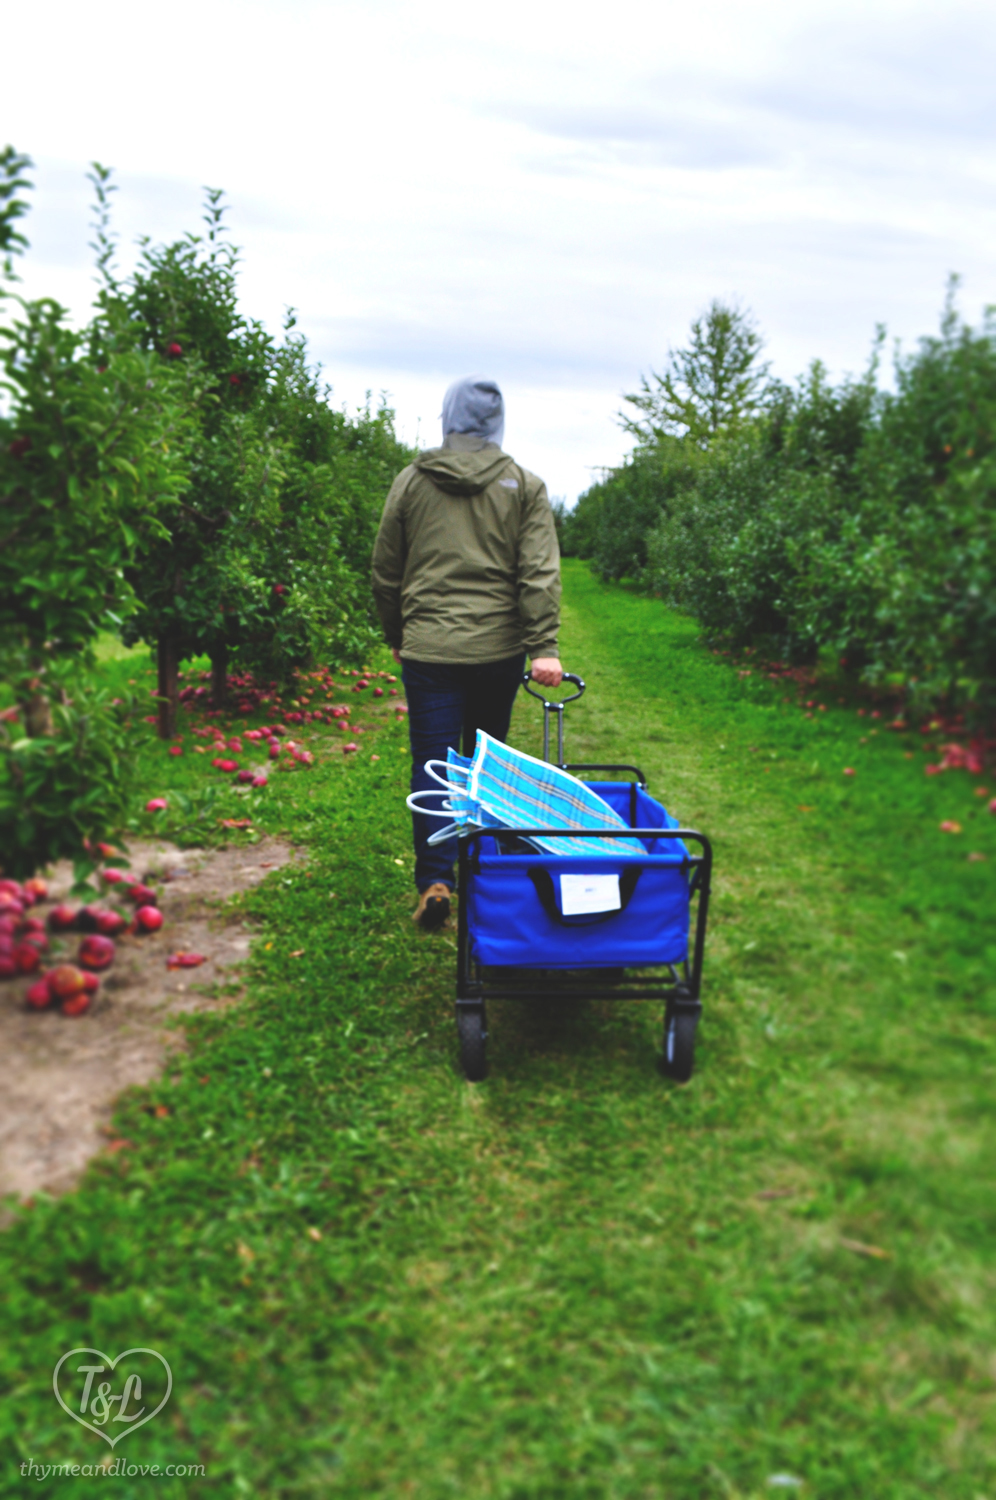 Apple Picking at Crane's Orchard in Fennville, Michigan